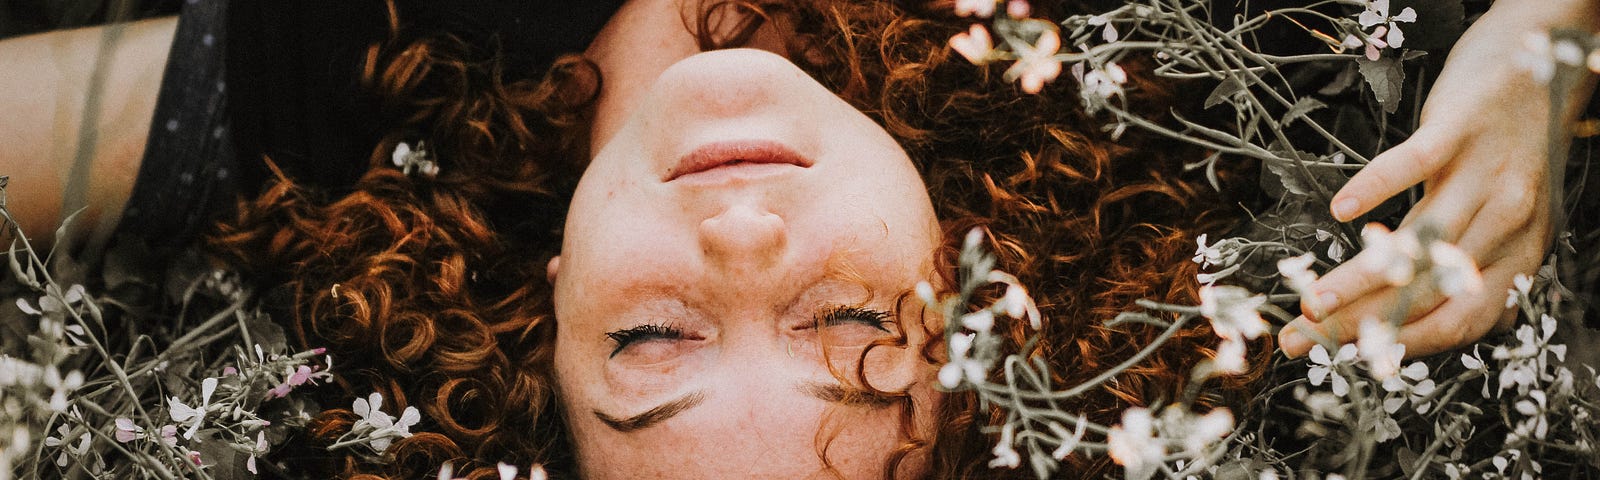 Red-haired White woman’s gently smiling face turned up-side-down on a bed of small white flowers.